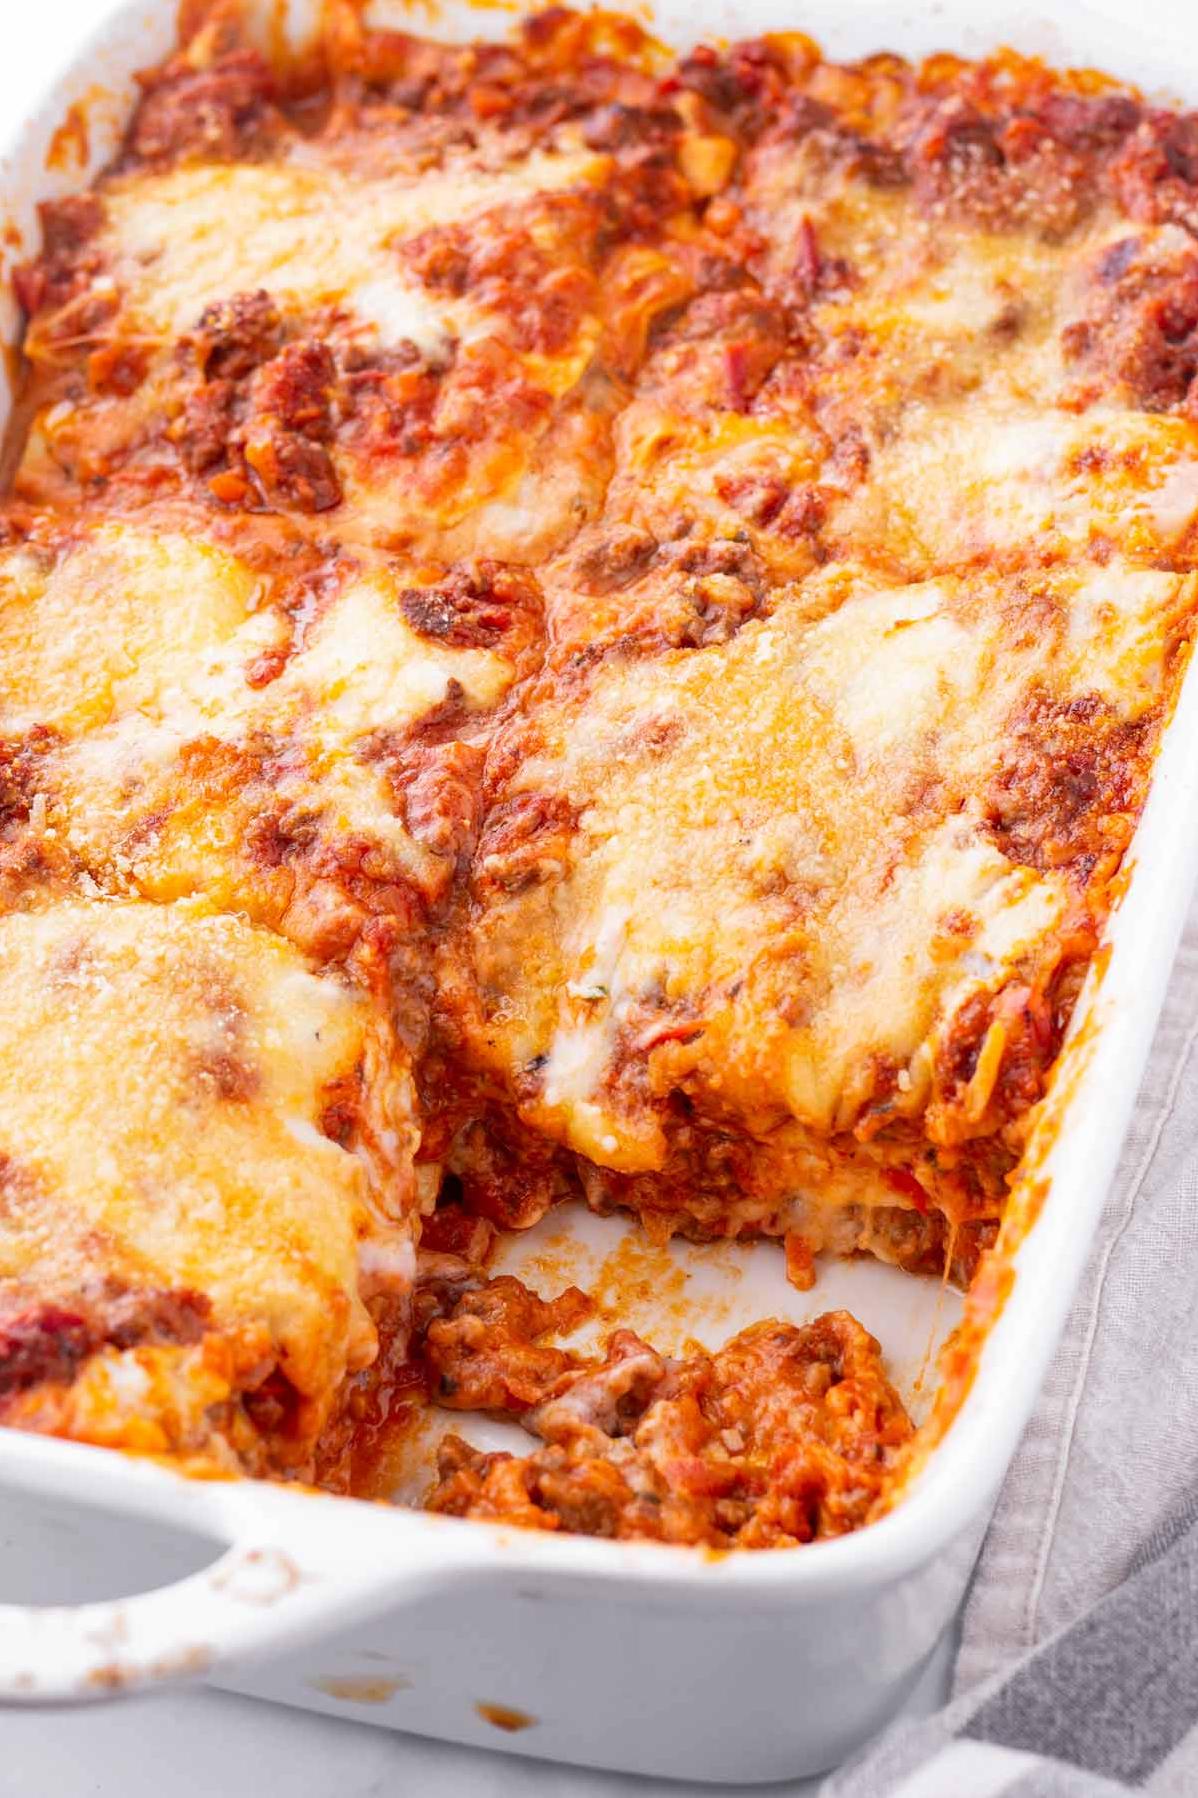  A Southern classic with a lasagna twist